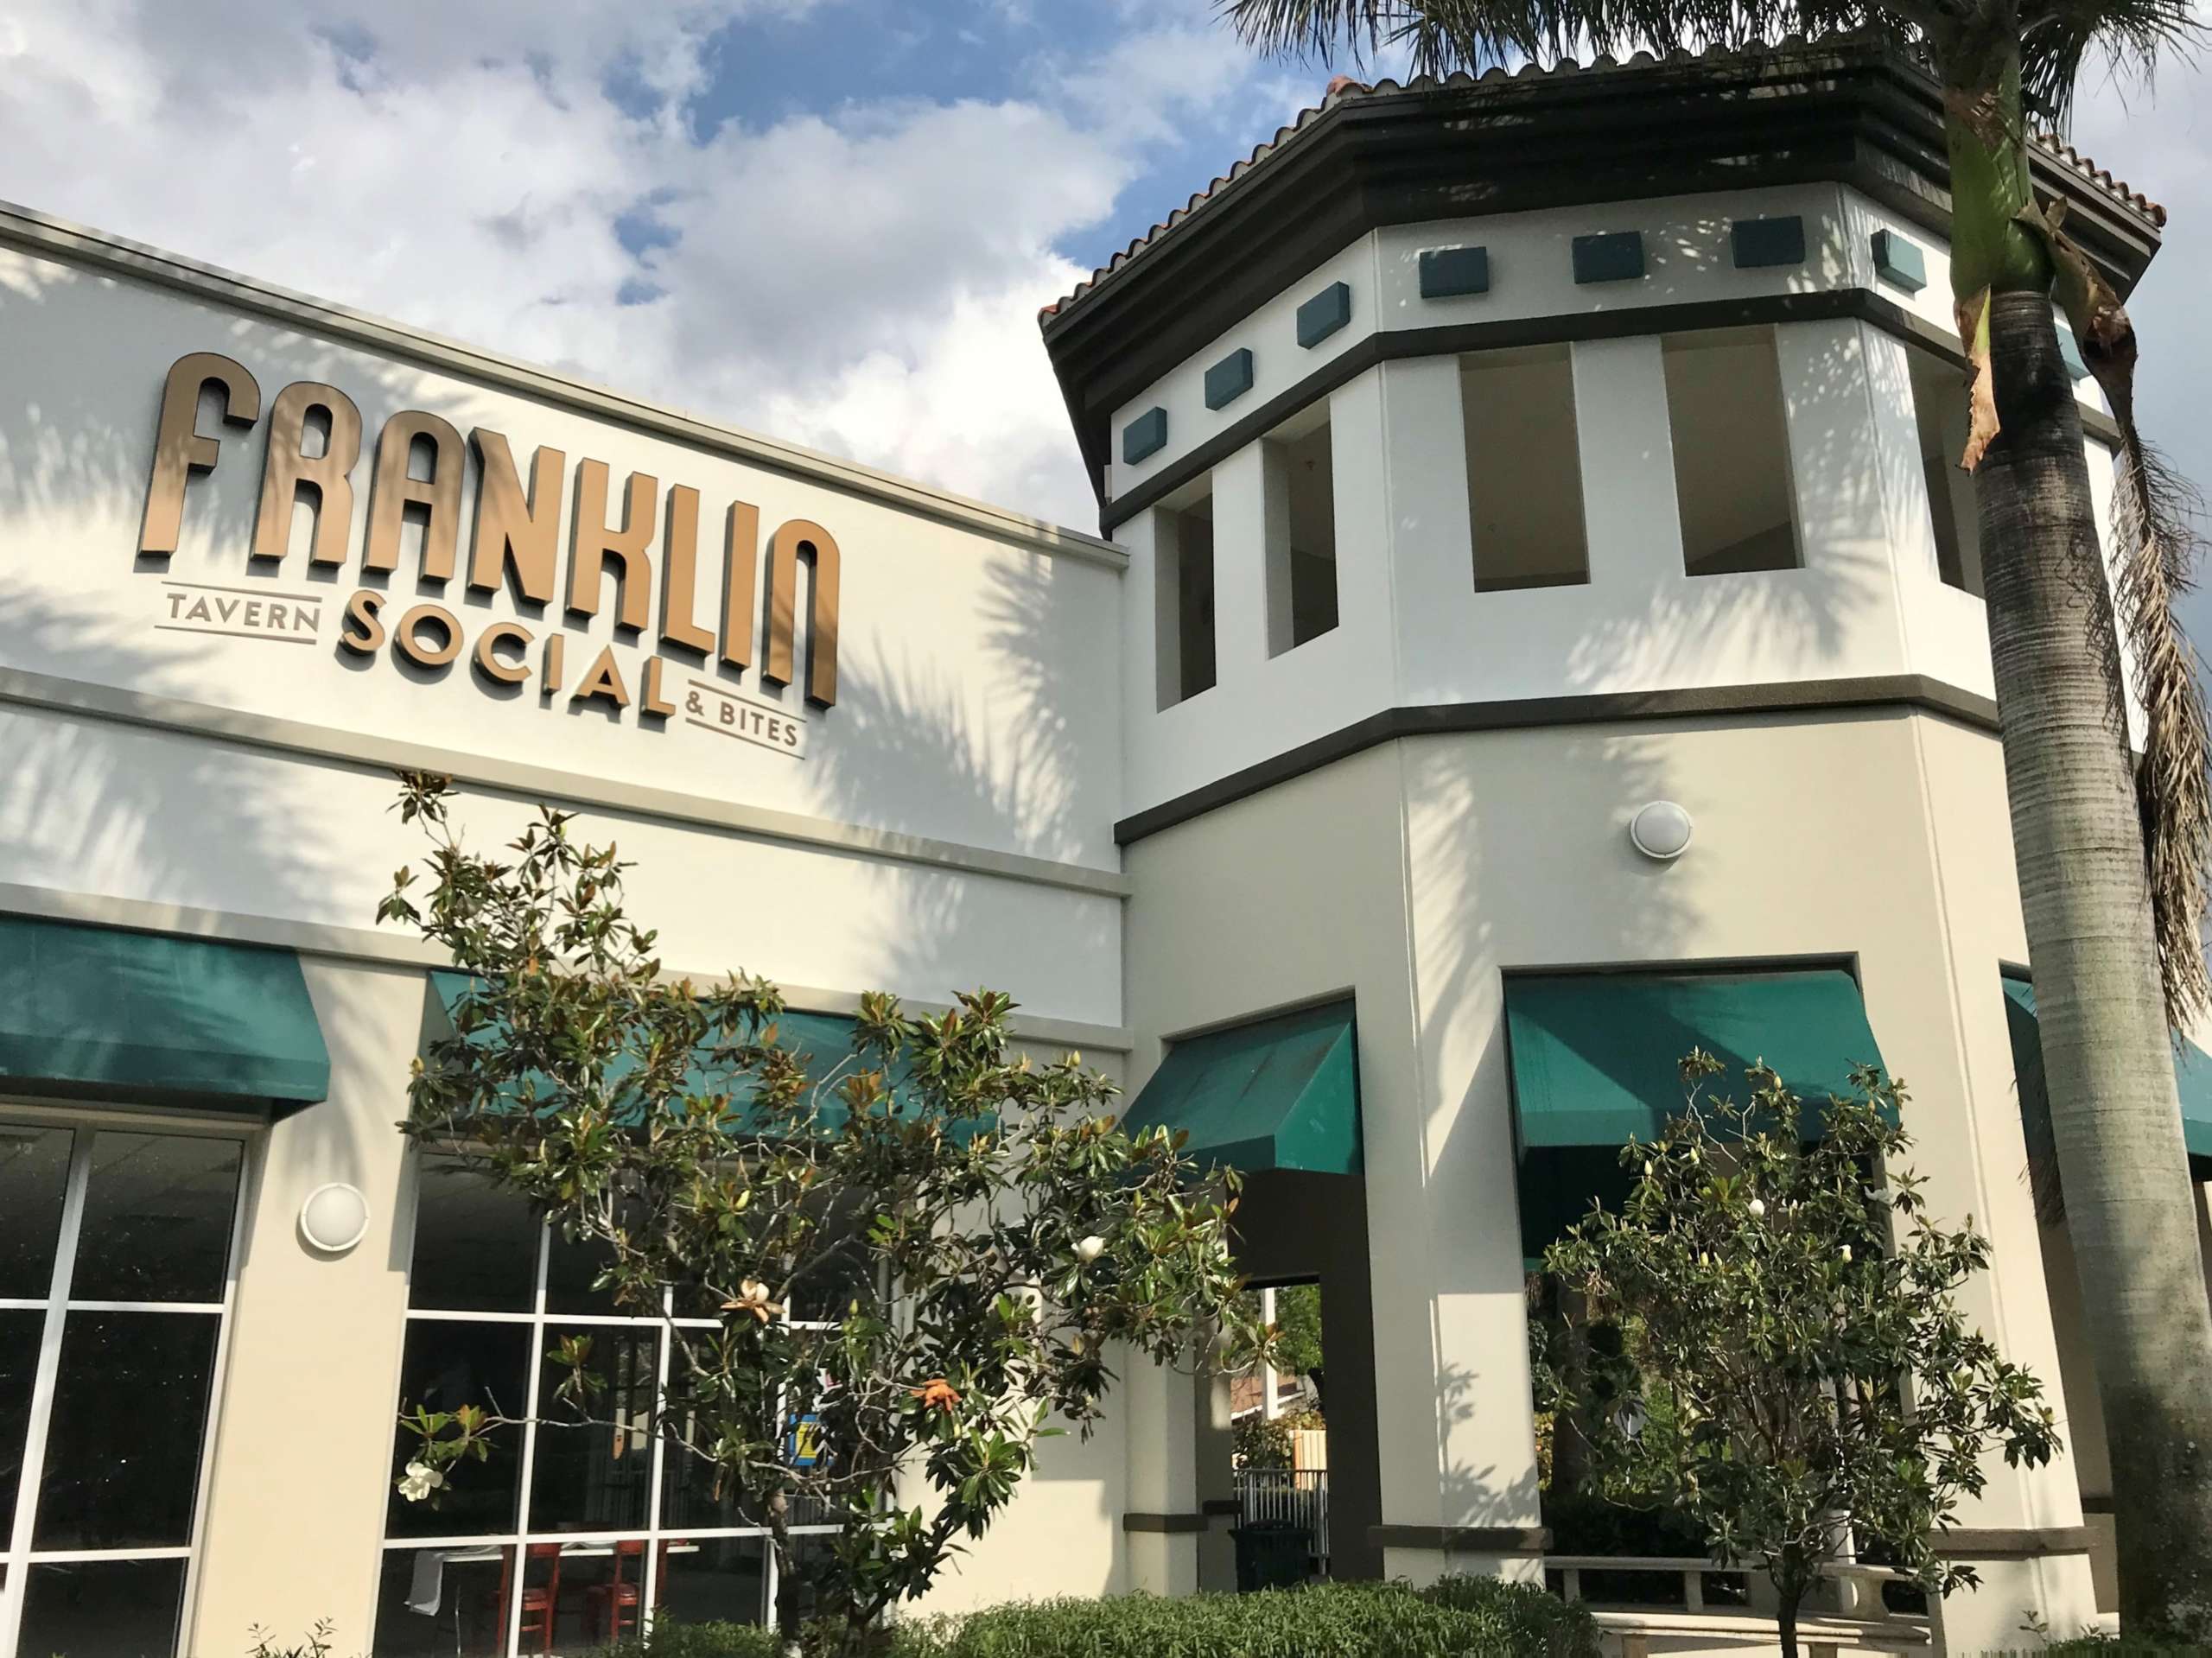 The Franklin Social in North Naples